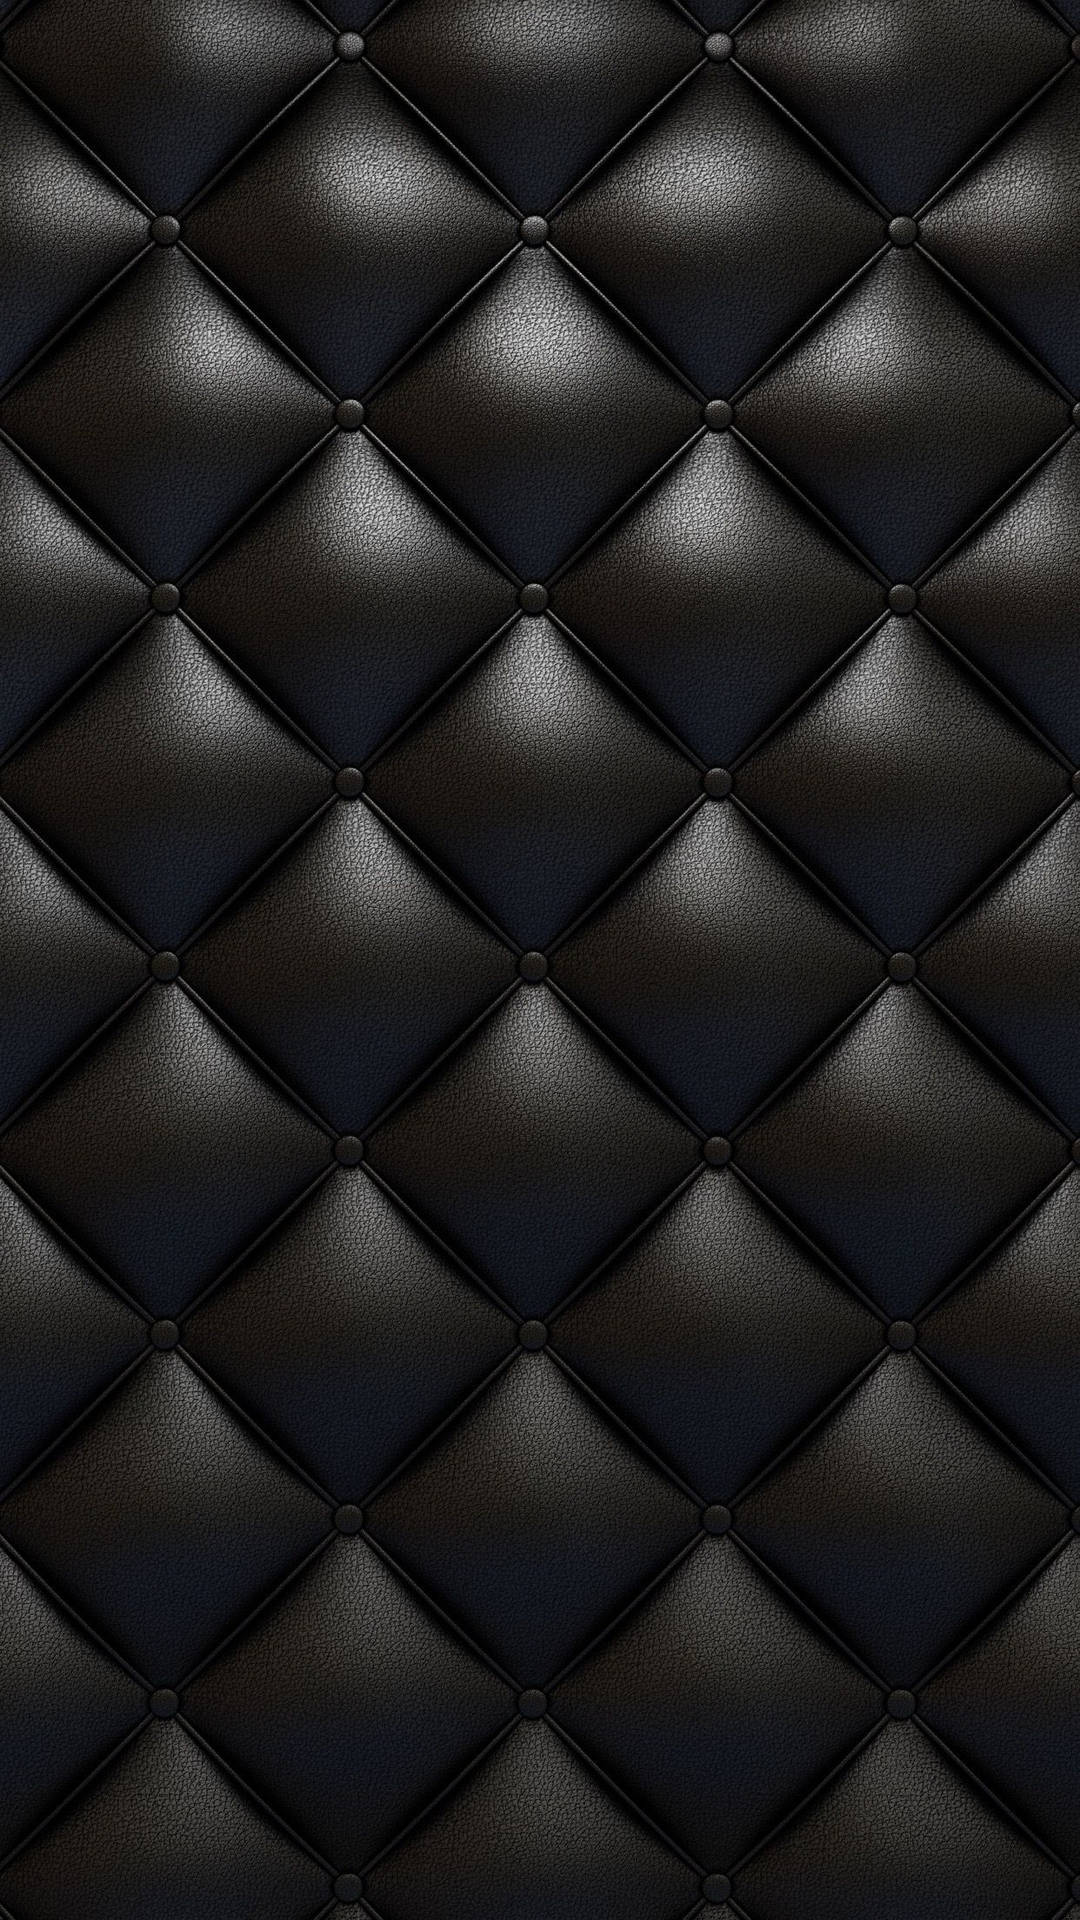 These wallpapers will match your Apple leather case